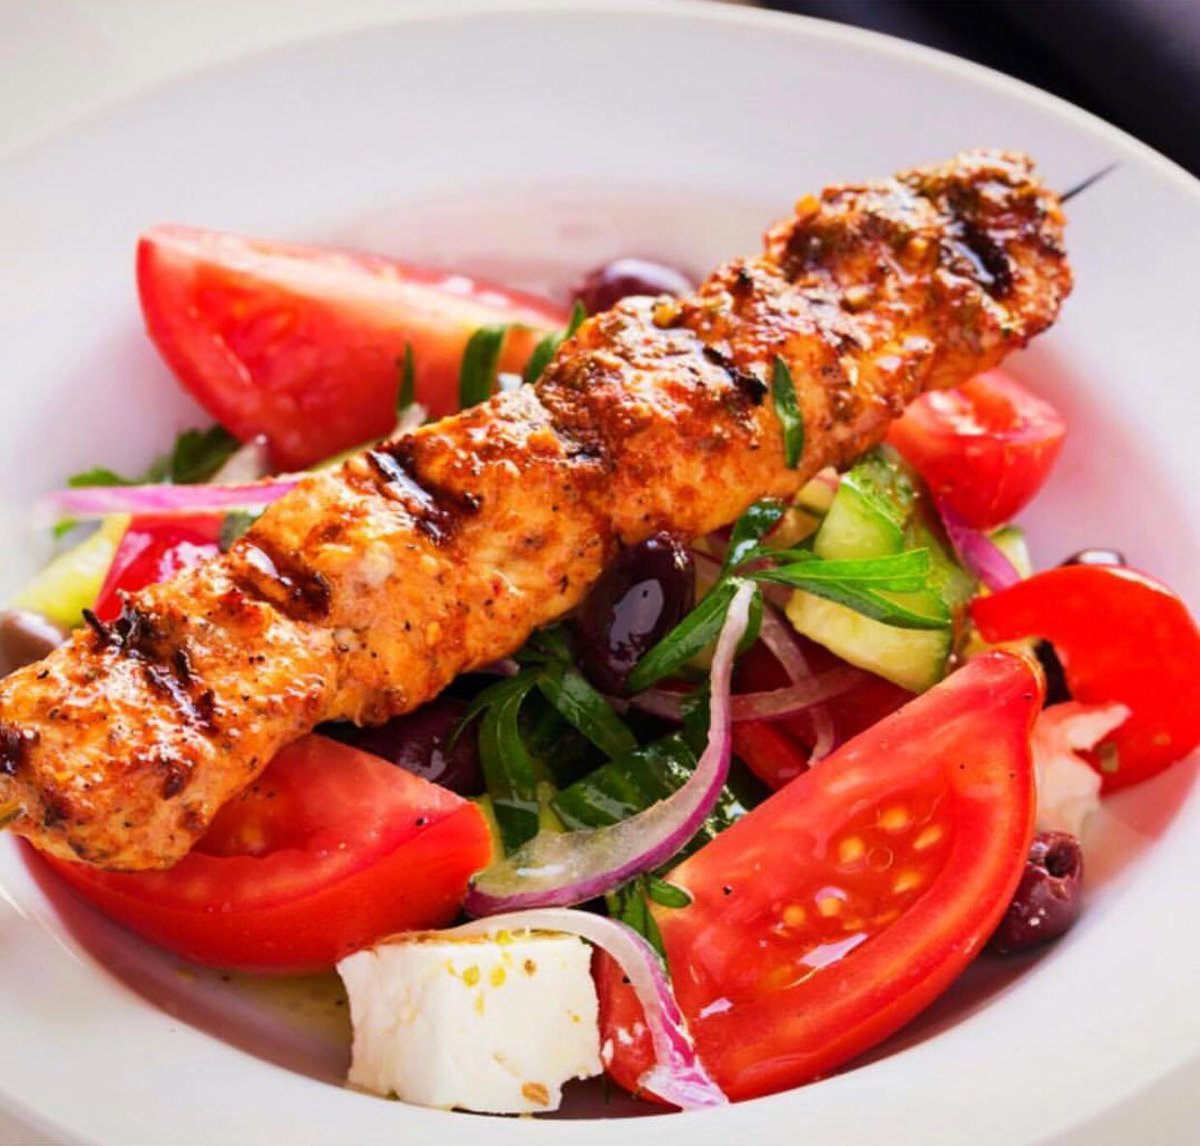 #lunch #time #greek #salad with #grilled #chicken #kebab #glutenfree #healtyeating #yummy #delicious #mediterranean #food #bayareafoodie #visitwinecountry #visitnapavalley #winecountry #downtownnapa #donapa